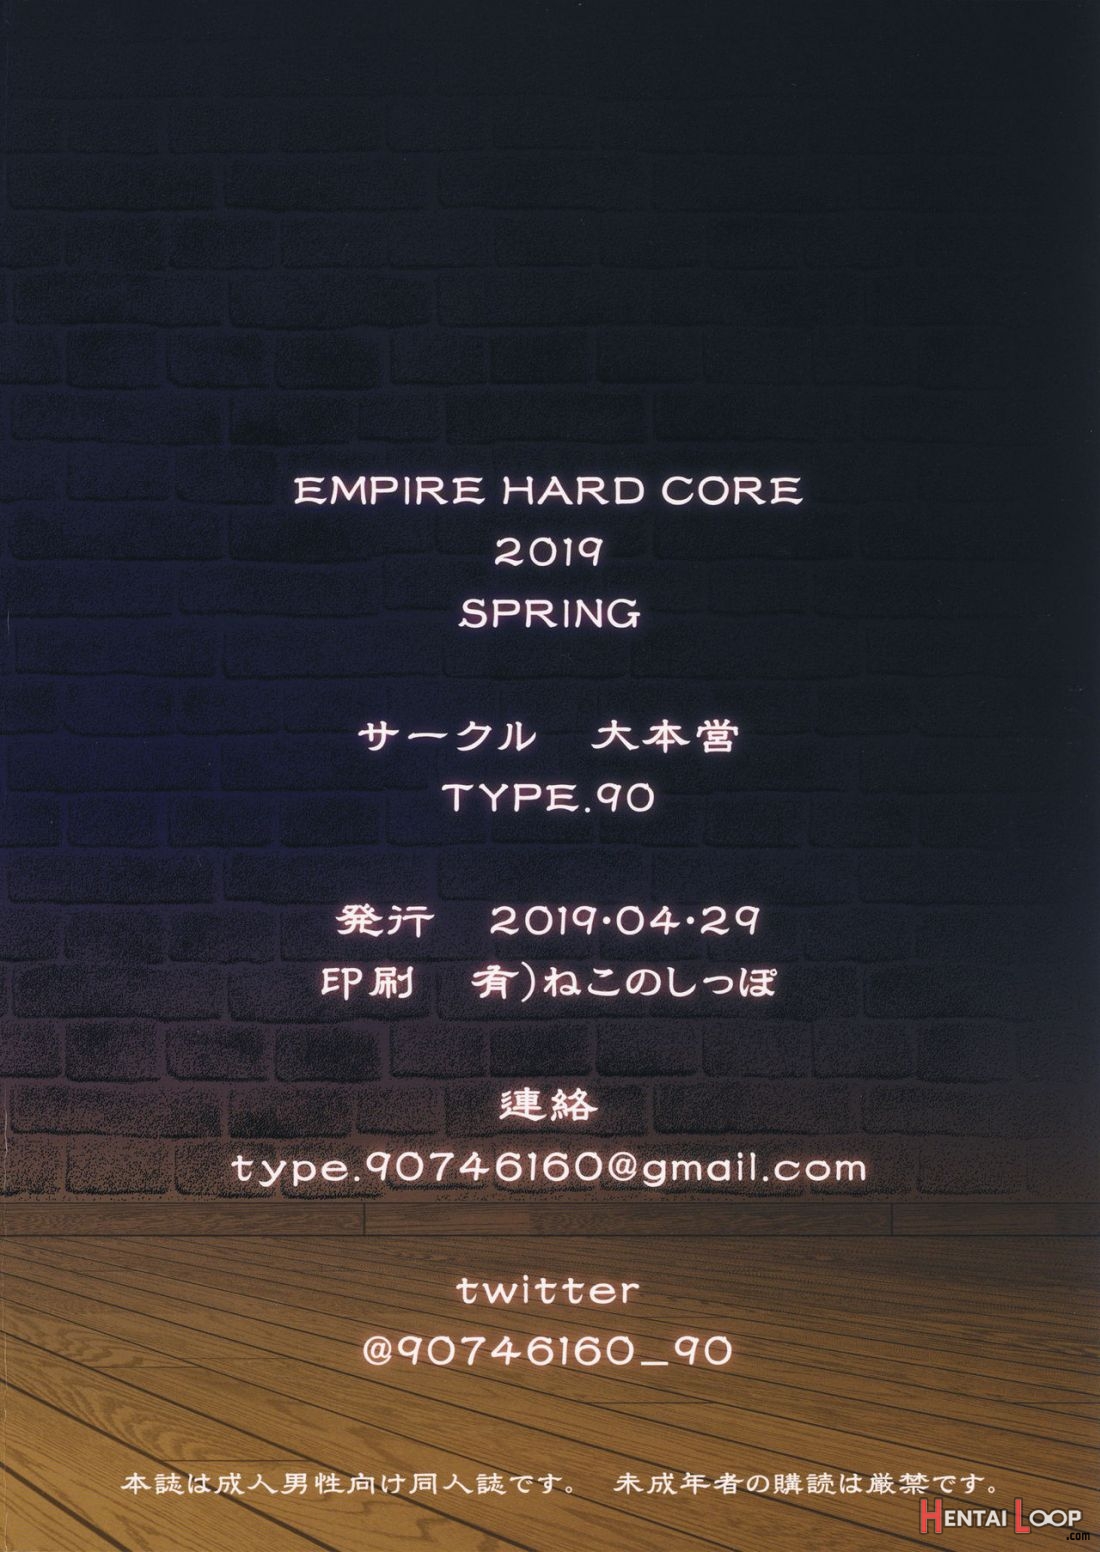 Empire Hard Core 2019 Spring page 26